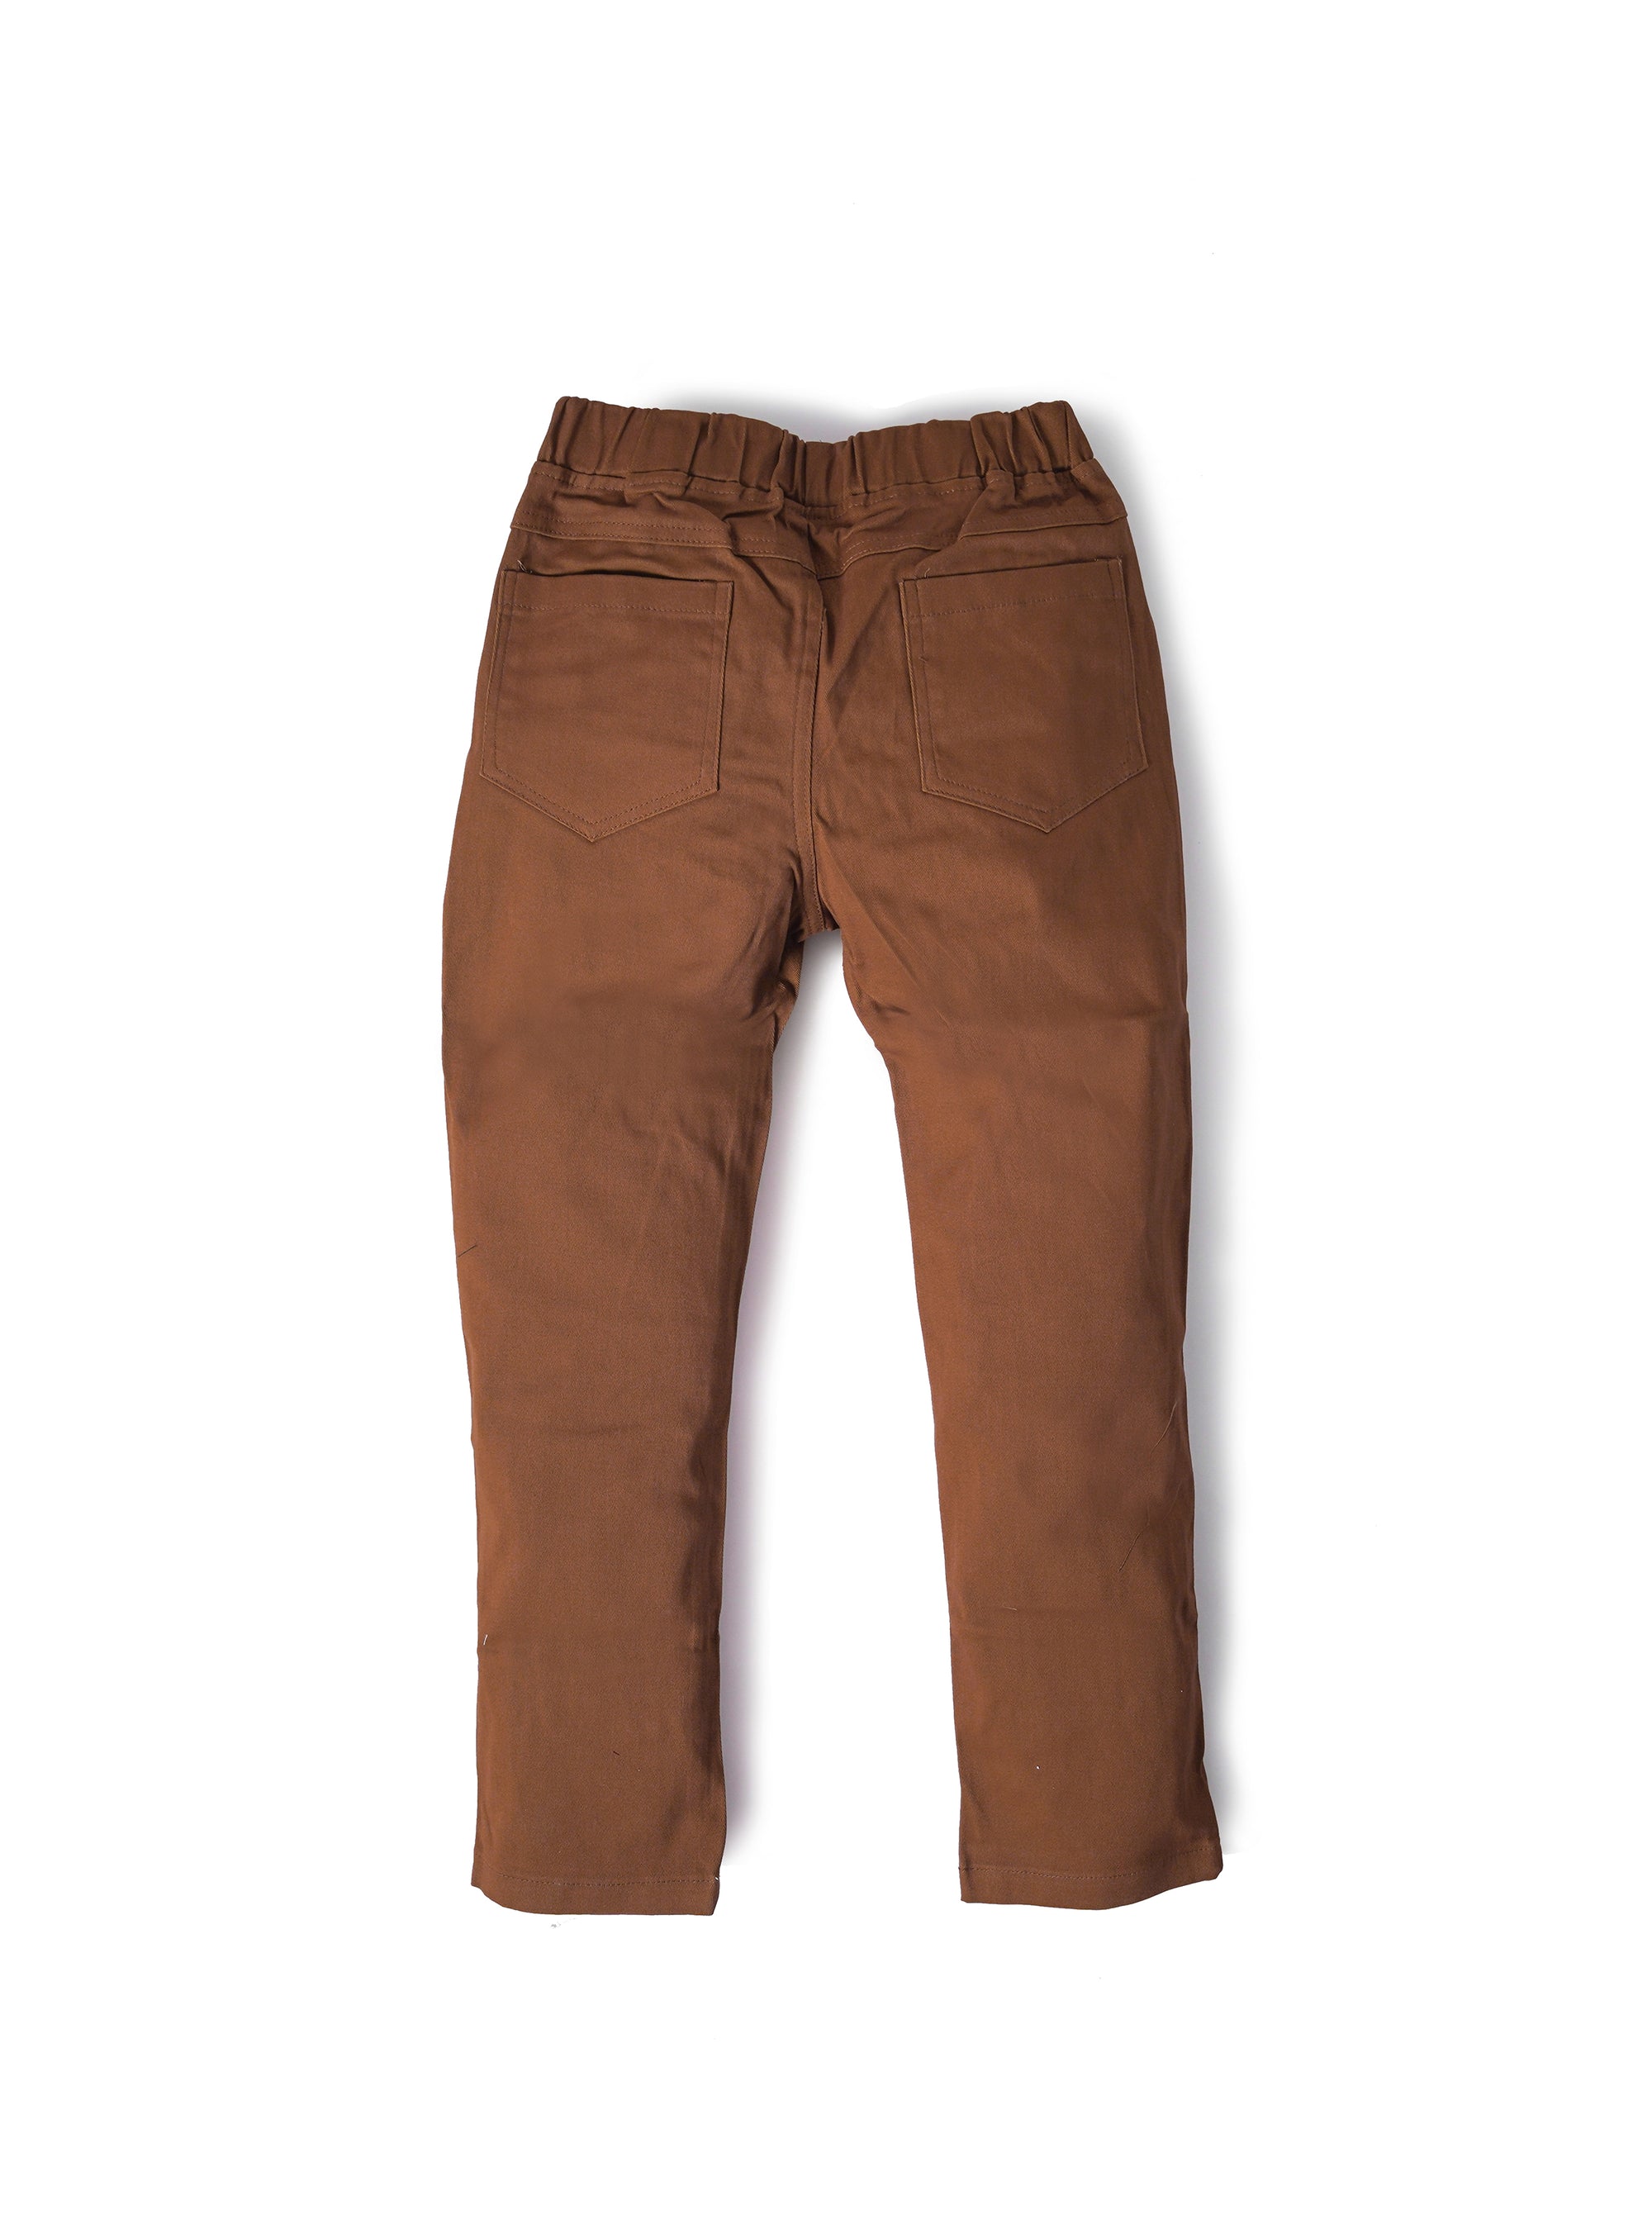 caramel brown chinos with stretchable waist